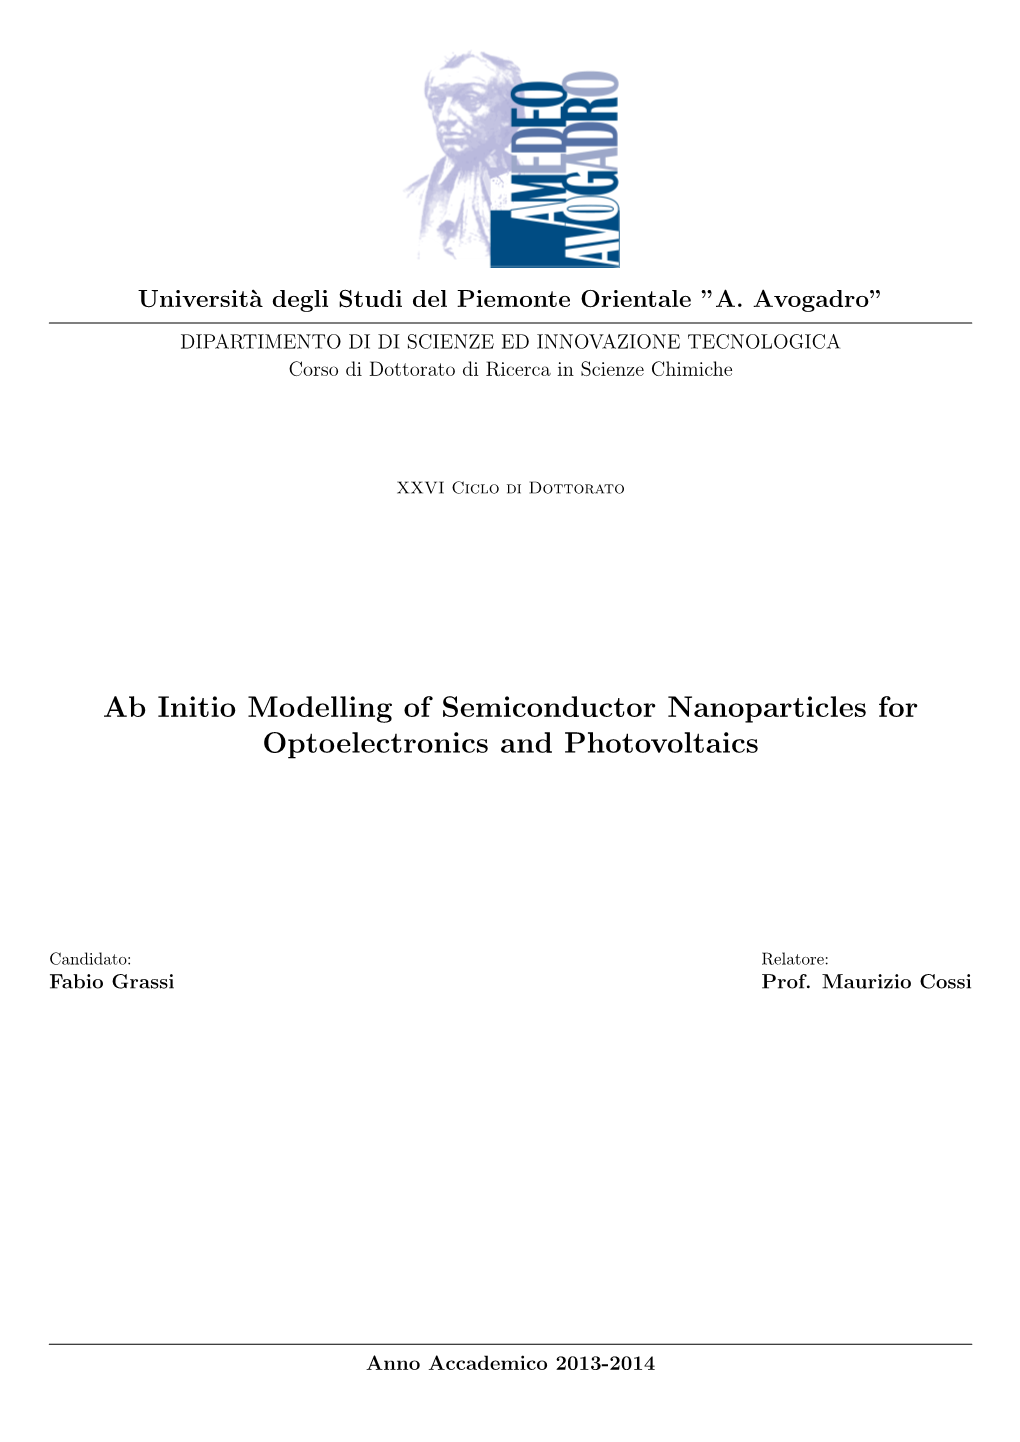 Ab Initio Modelling of Semiconductor Nanoparticles for Optoelectronics and Photovoltaics